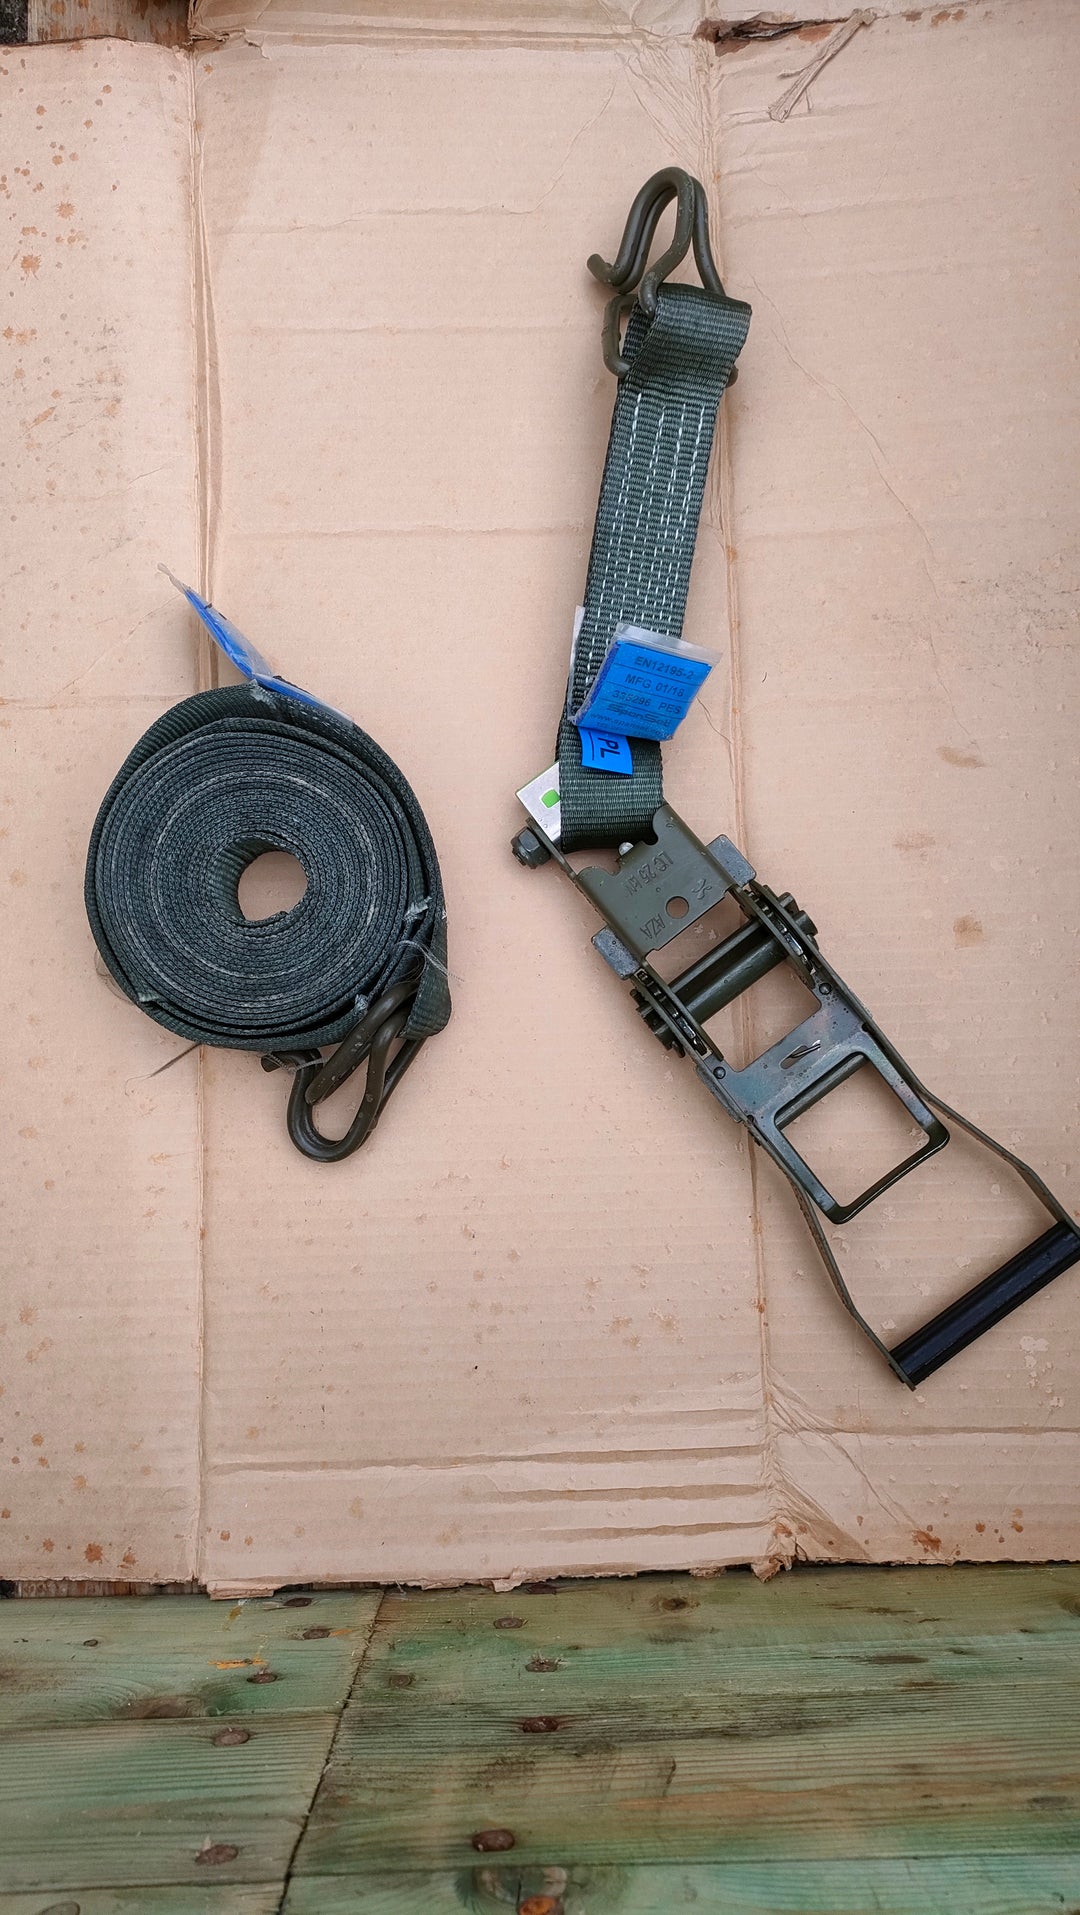 long strap coiled up into a roll and large metal ratchet attachment on cardboard background